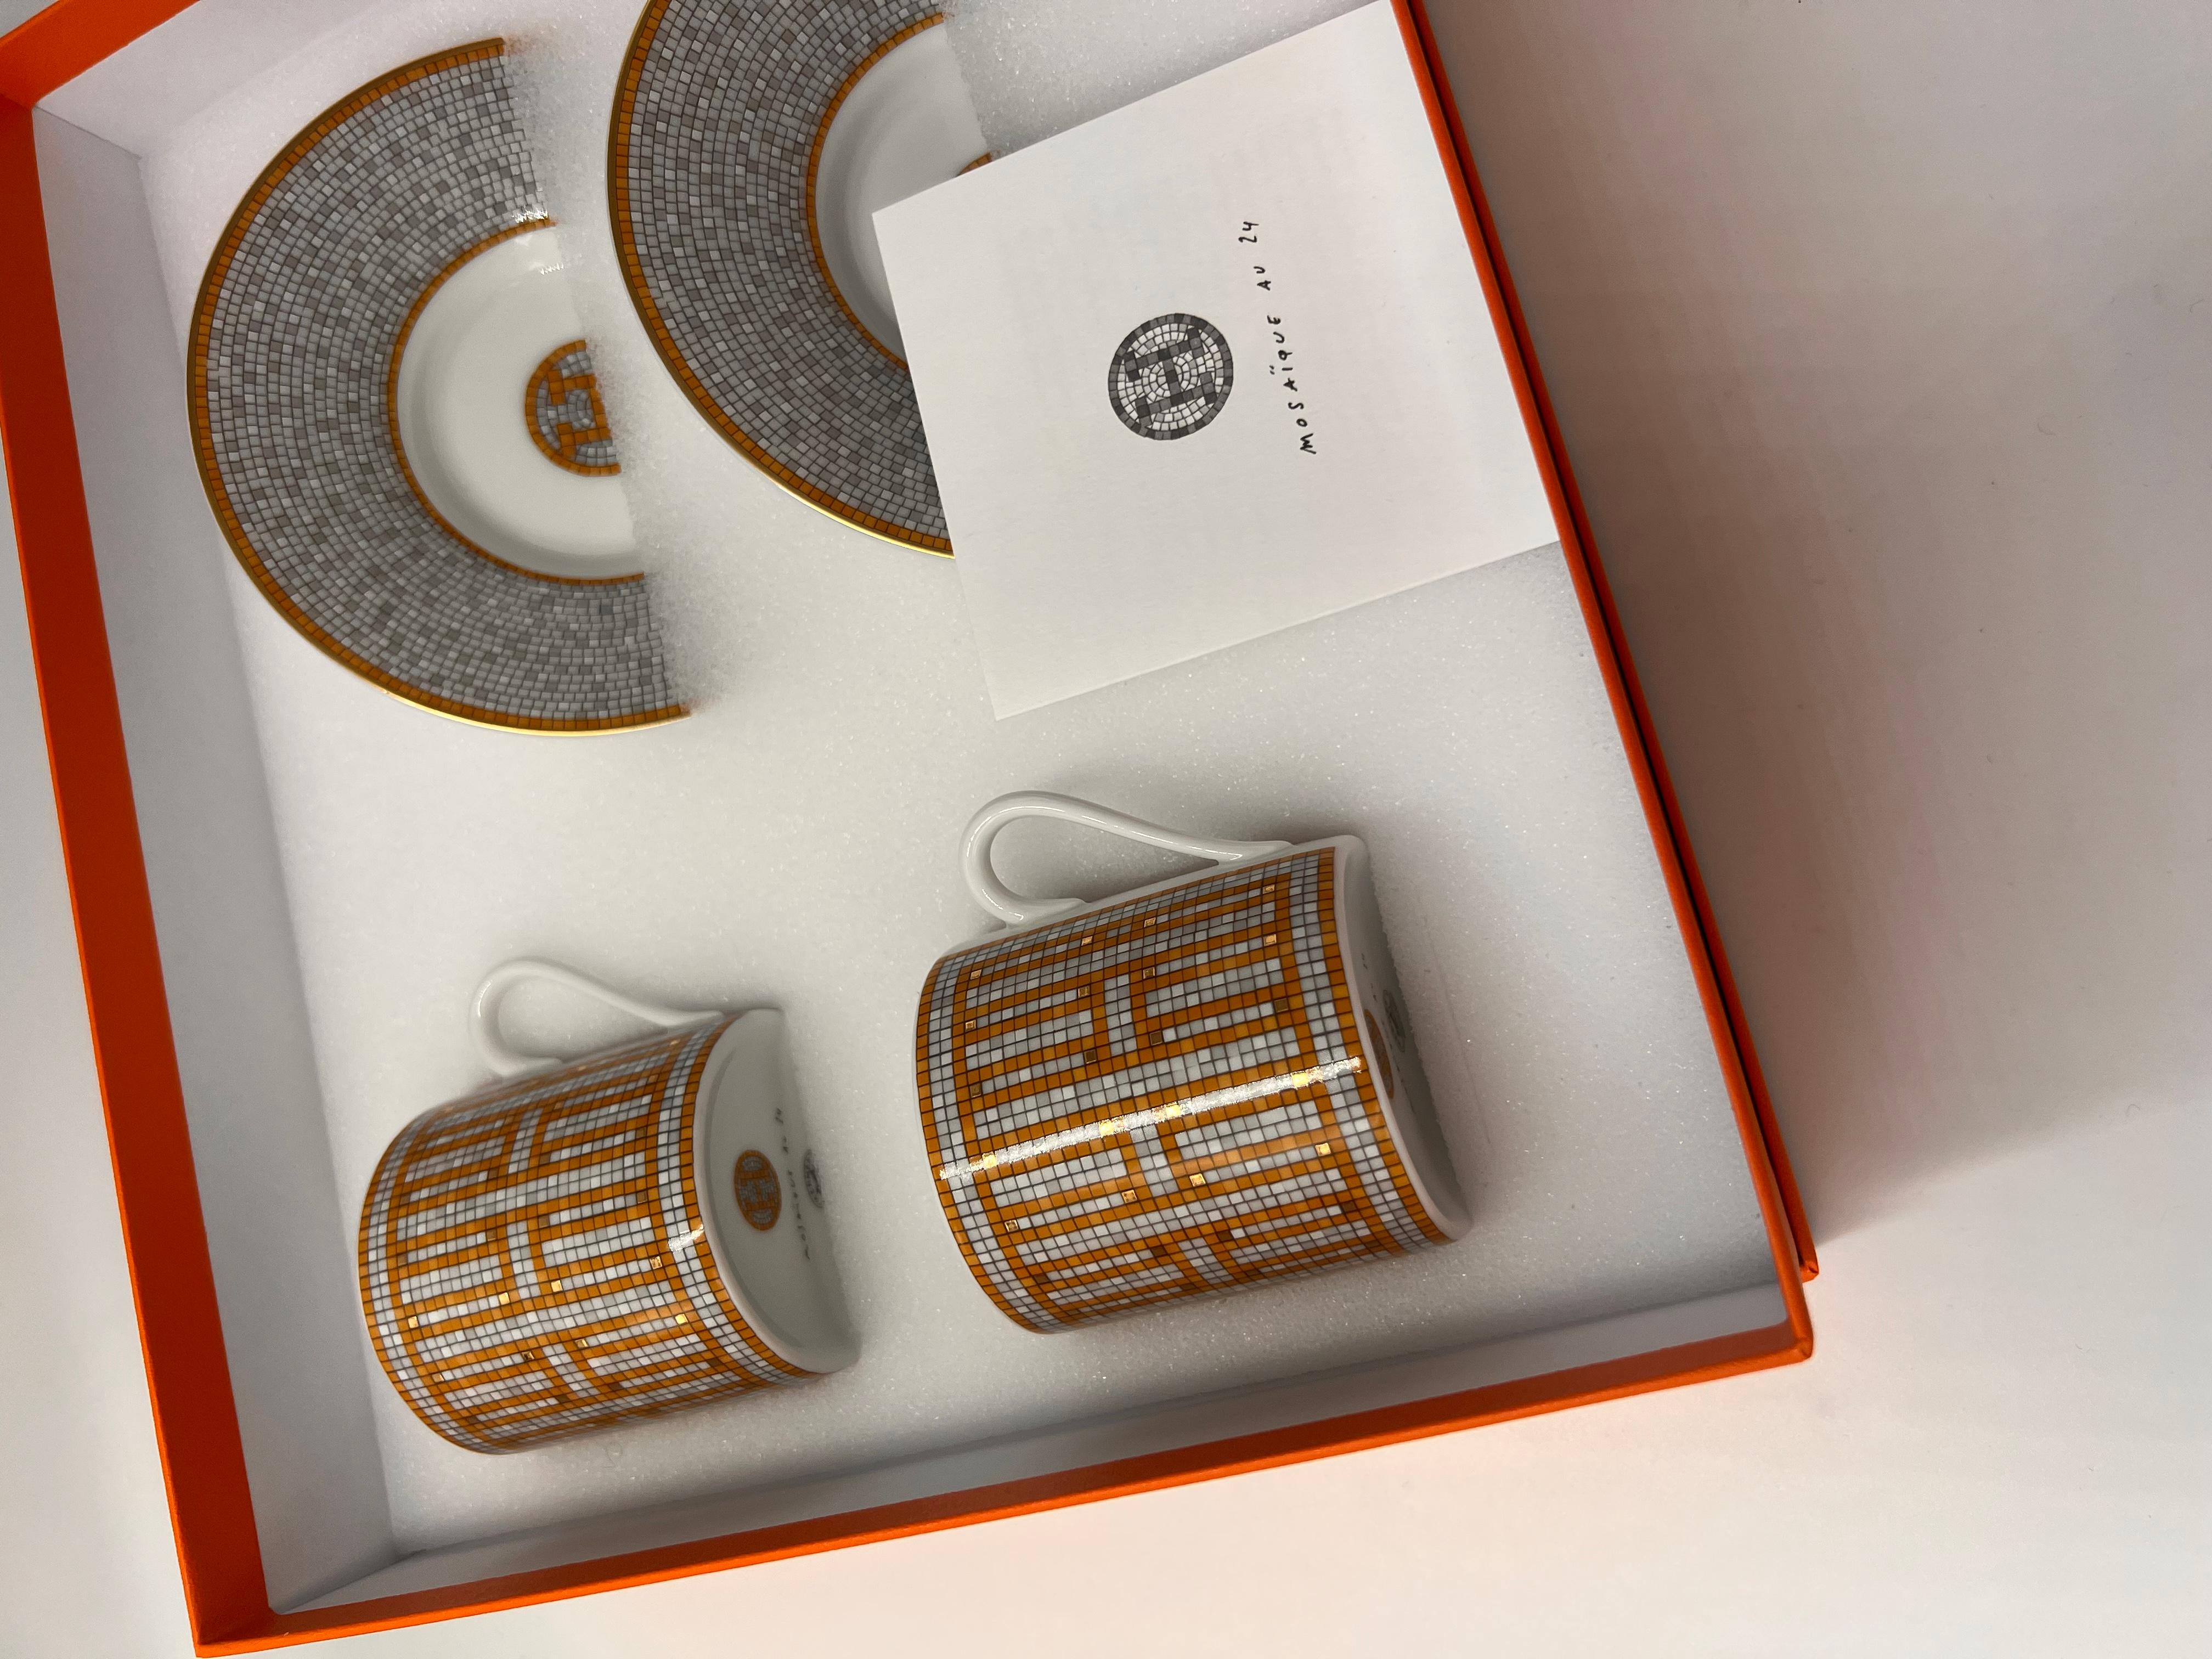 Set of 2 gold, grey and white porcelain Hermès Mosaïque Au 24 coffee cup and matching saucer with tile design throughout, gilt accents and brand stamp on the bottom. Brand new in a box. 